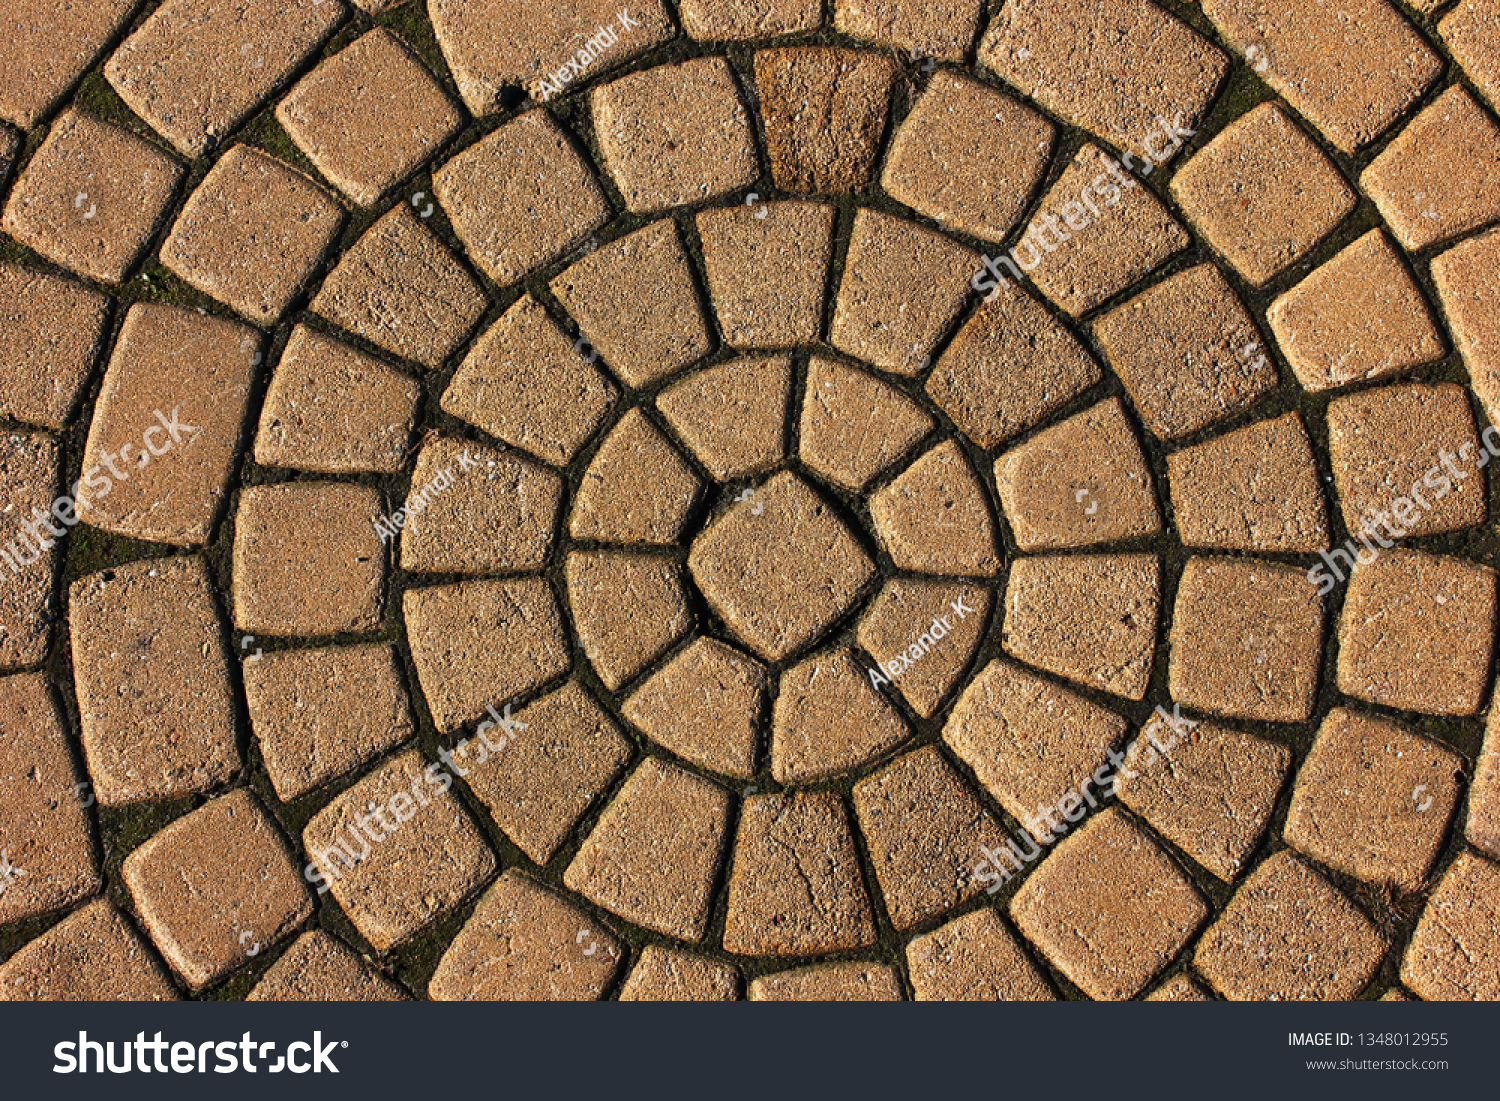 Stone pavement in perspective. Stone pavement texture. Granite cobblestoned pavement background. Abstract background of a cobblestone pavement close-up #1348012955